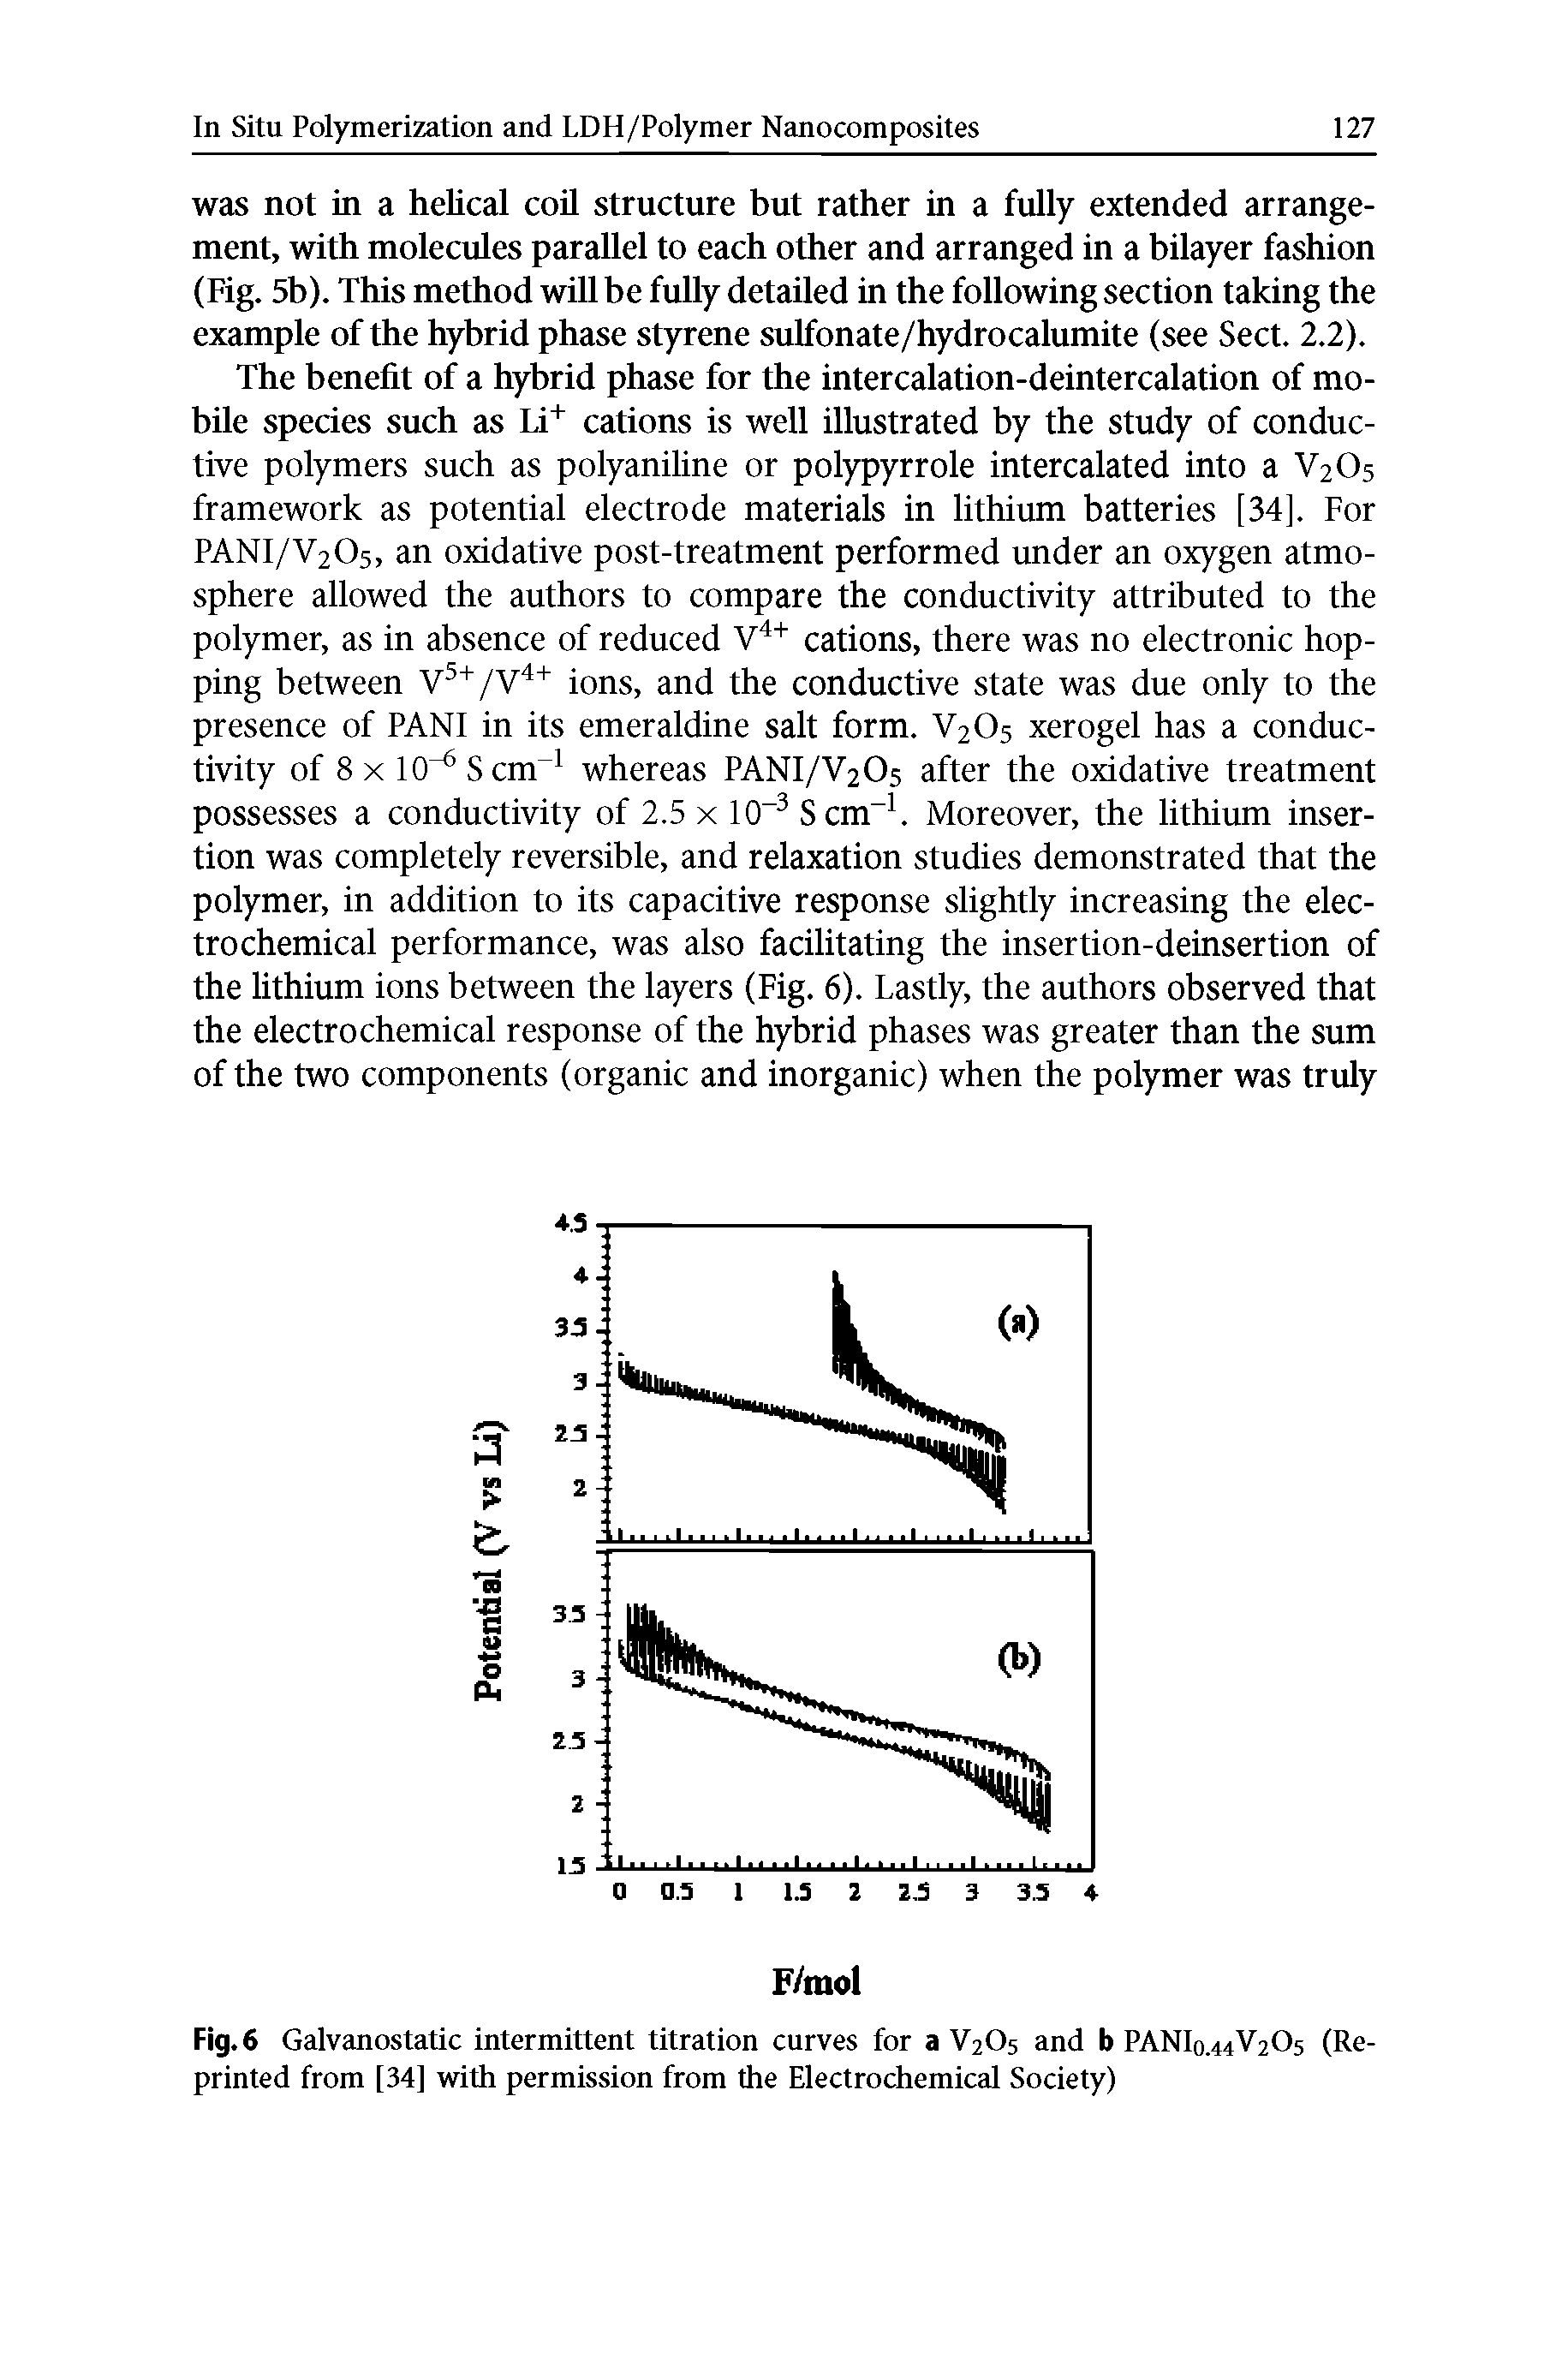 Fig. 6 Galvanostatic intermittent titration curves for a V2O5 and b PANI0.44V2O5 (Reprinted from [34] with permission from the Electrochemical Society)...